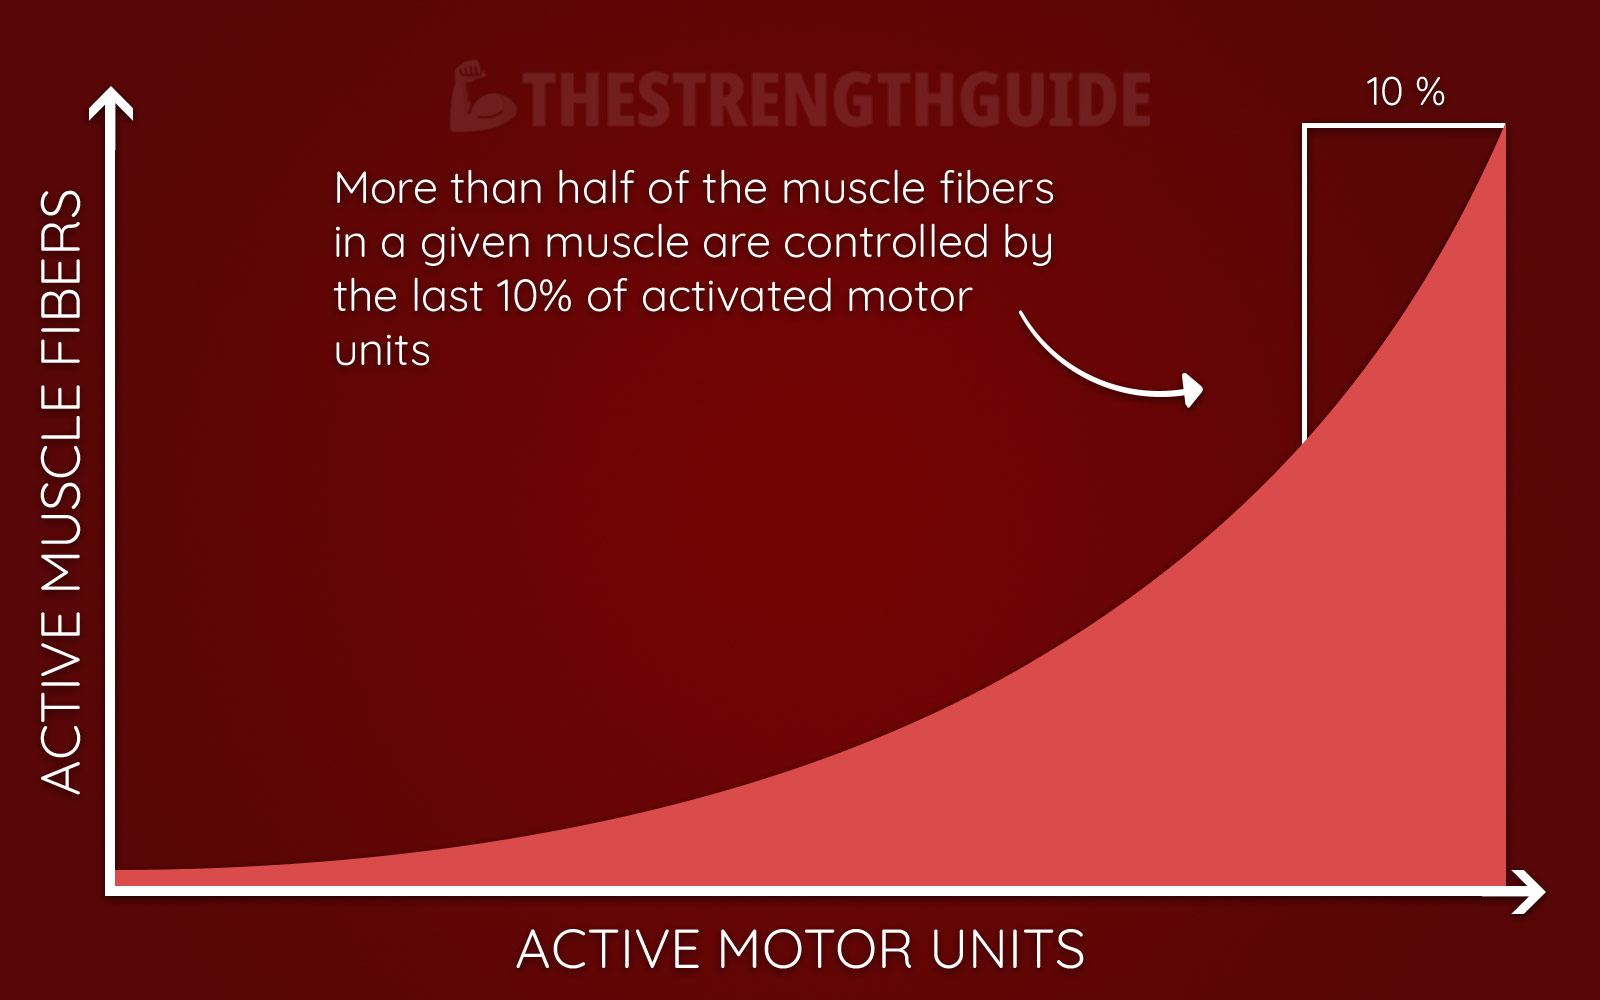 A graph showing the number of muscle fibers connected to active motor units in a muscle